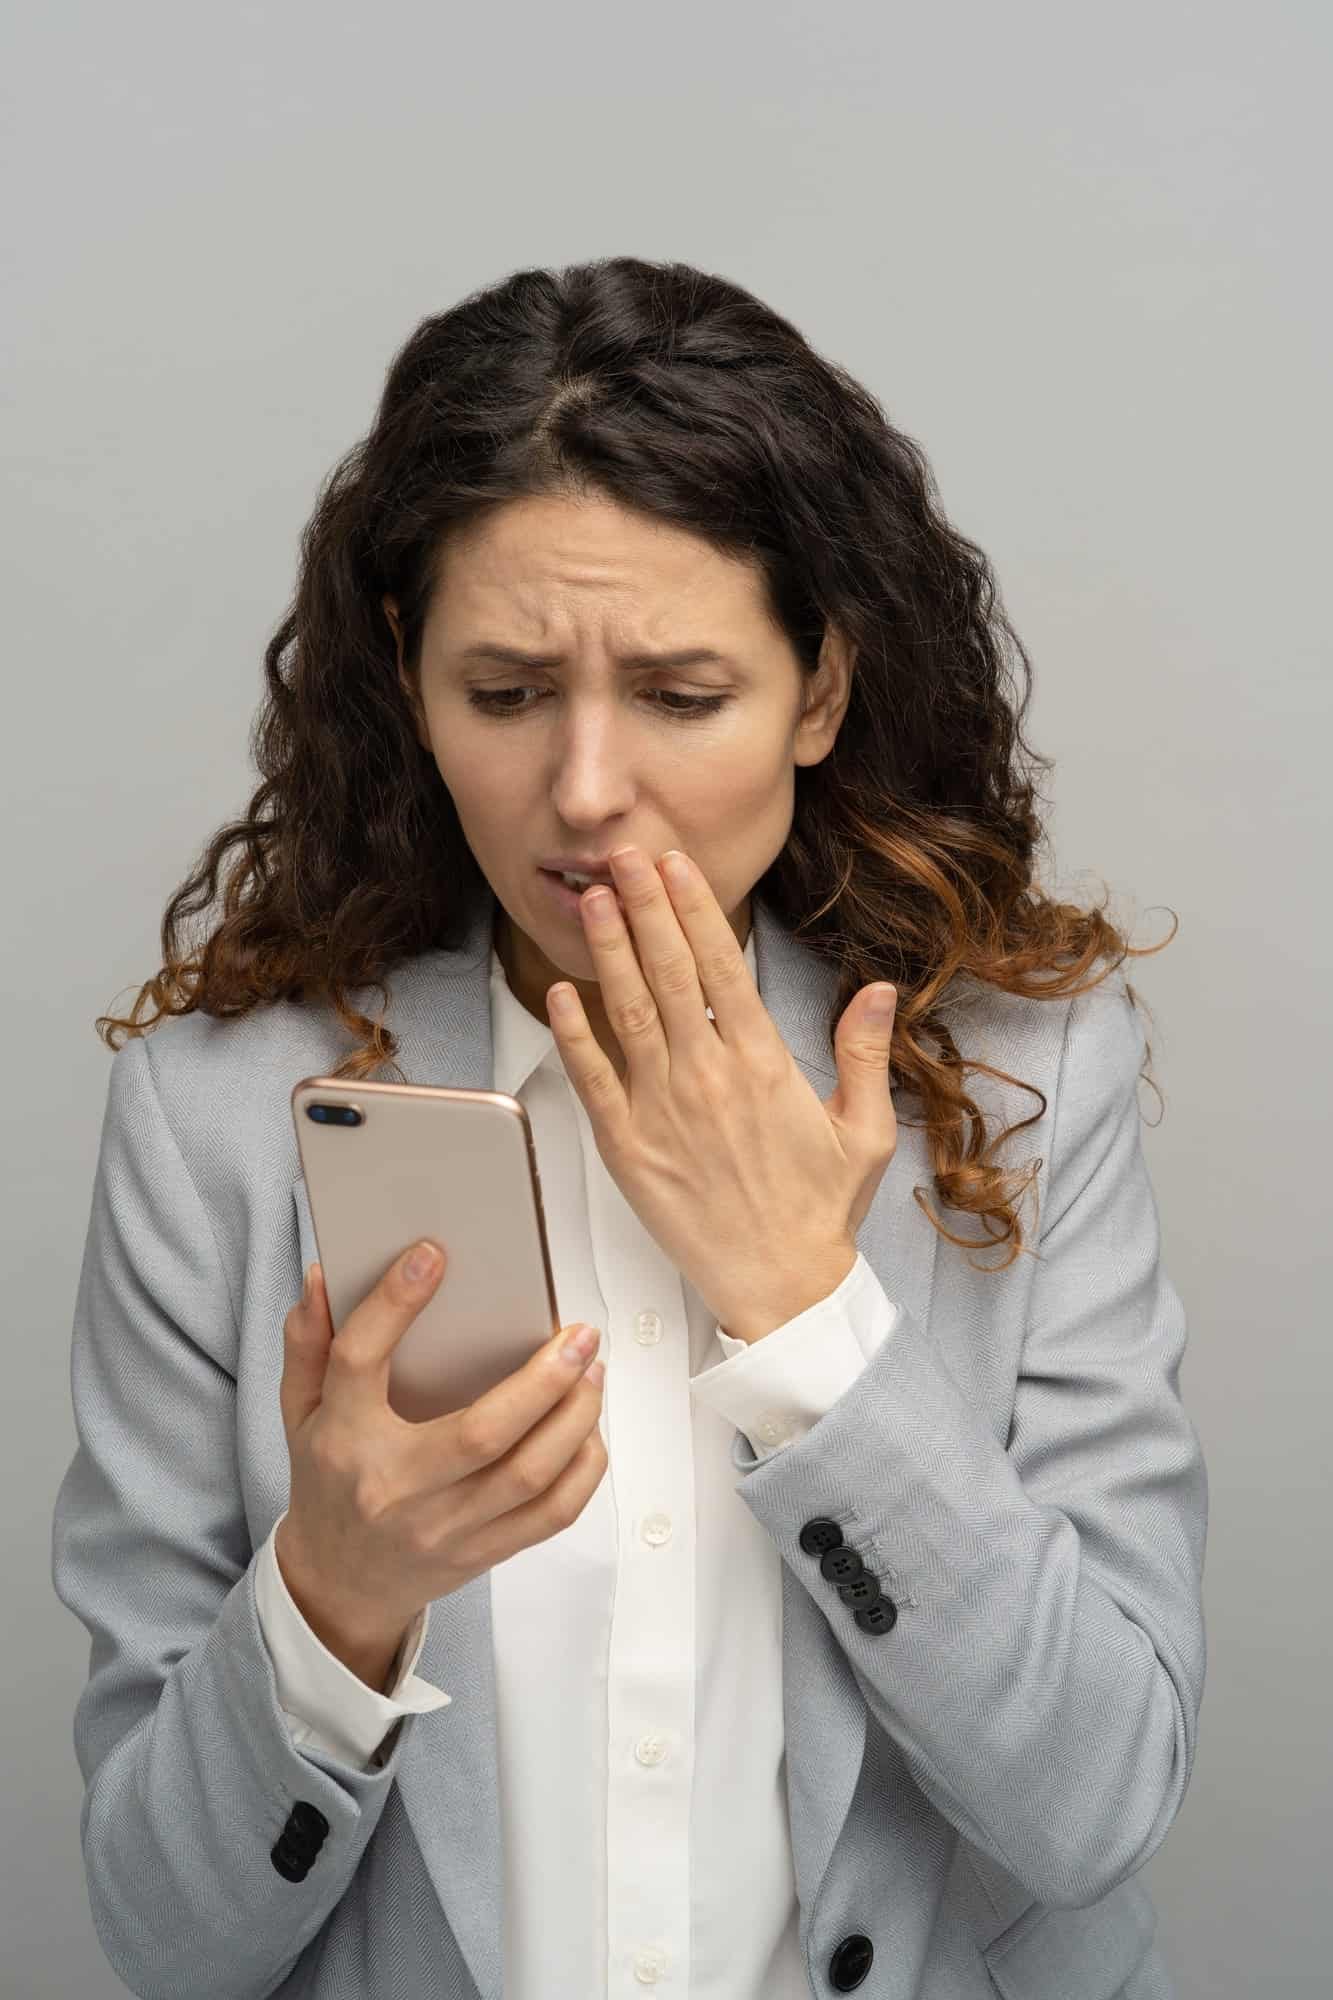 Frustrated shocked business woman or office worker looking at phone stunned with bad negative news